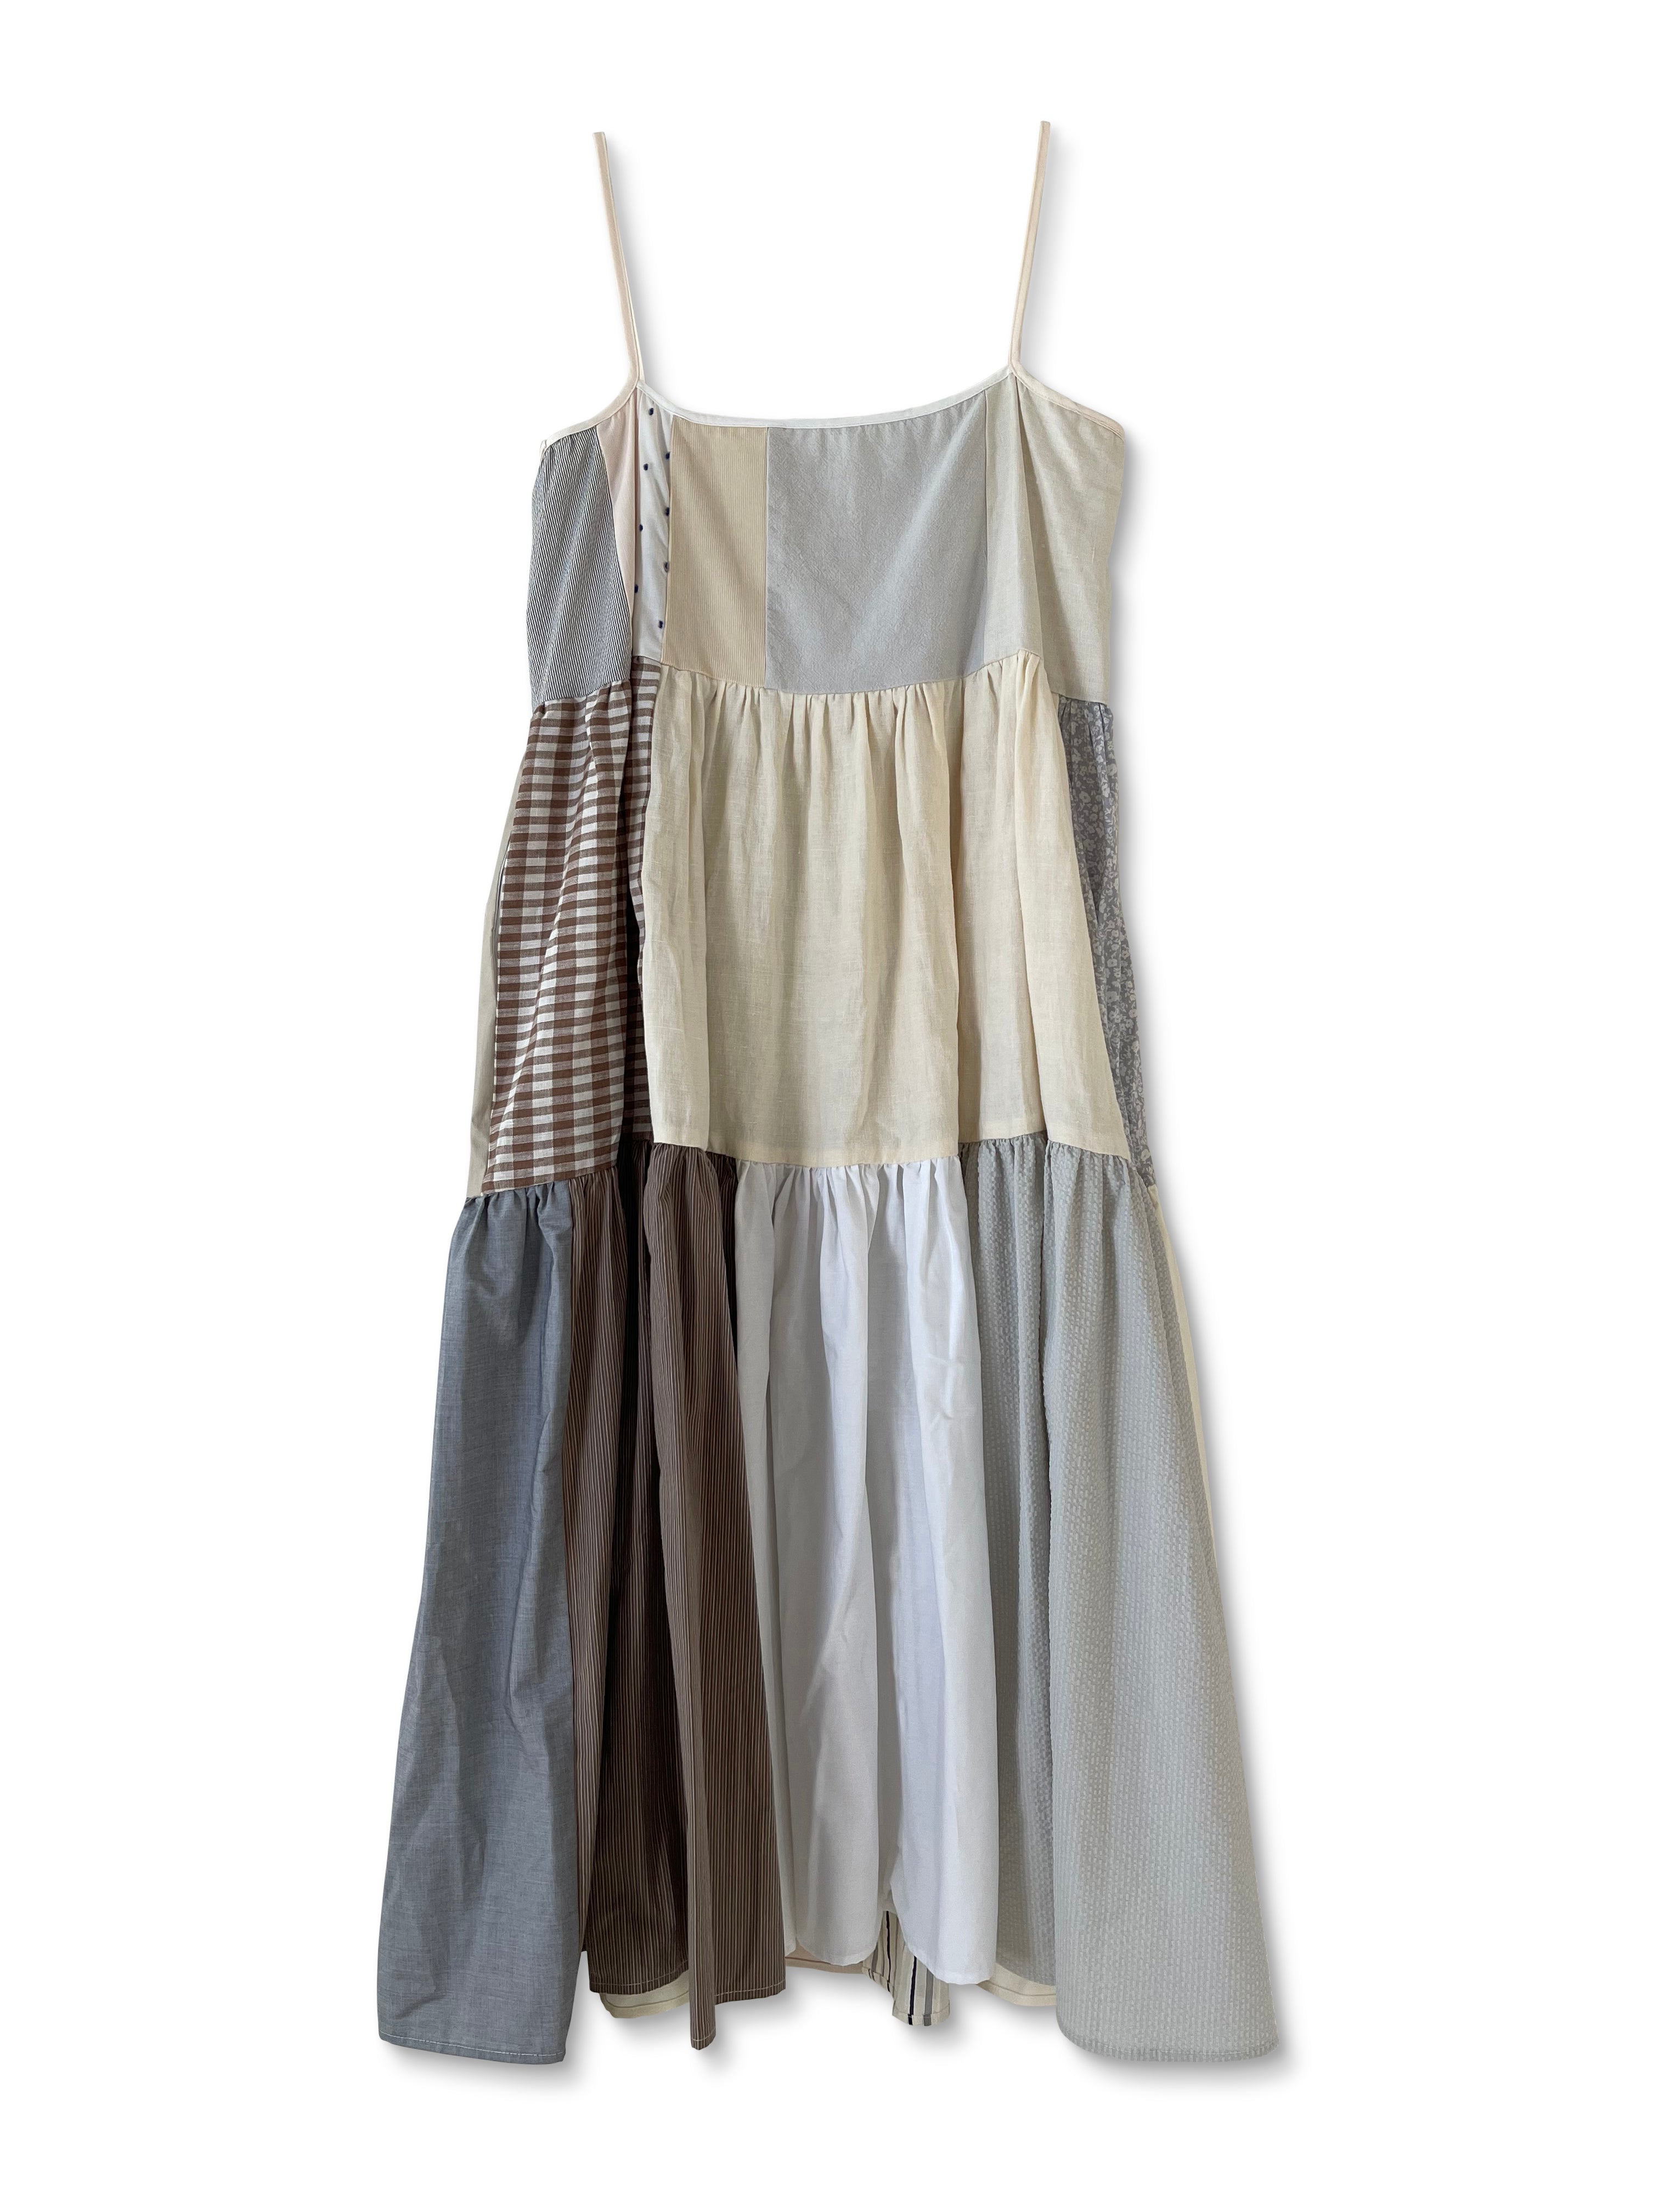 SENUFO BUTTON DOWN PATCHWORKED DRESS - CREAMS